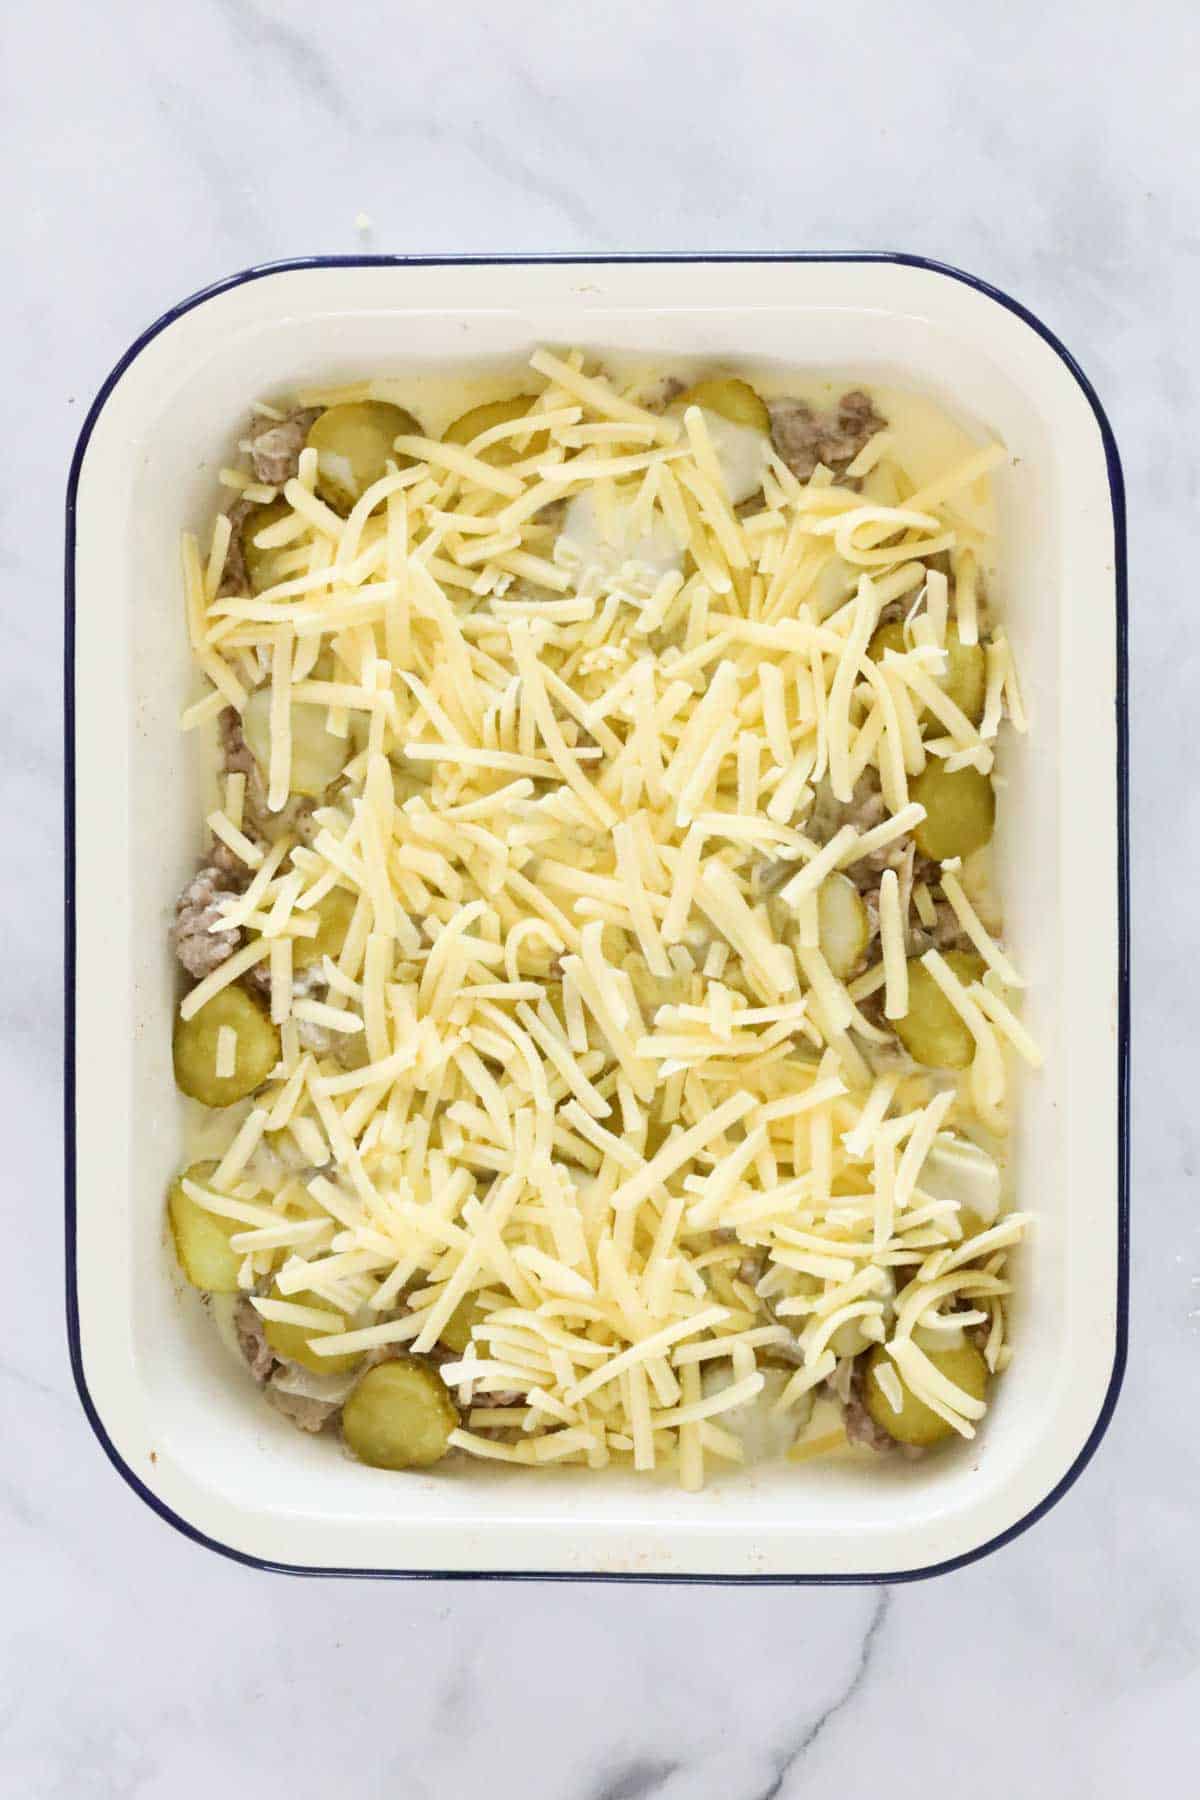 Sliced pickles covered in grated cheese.